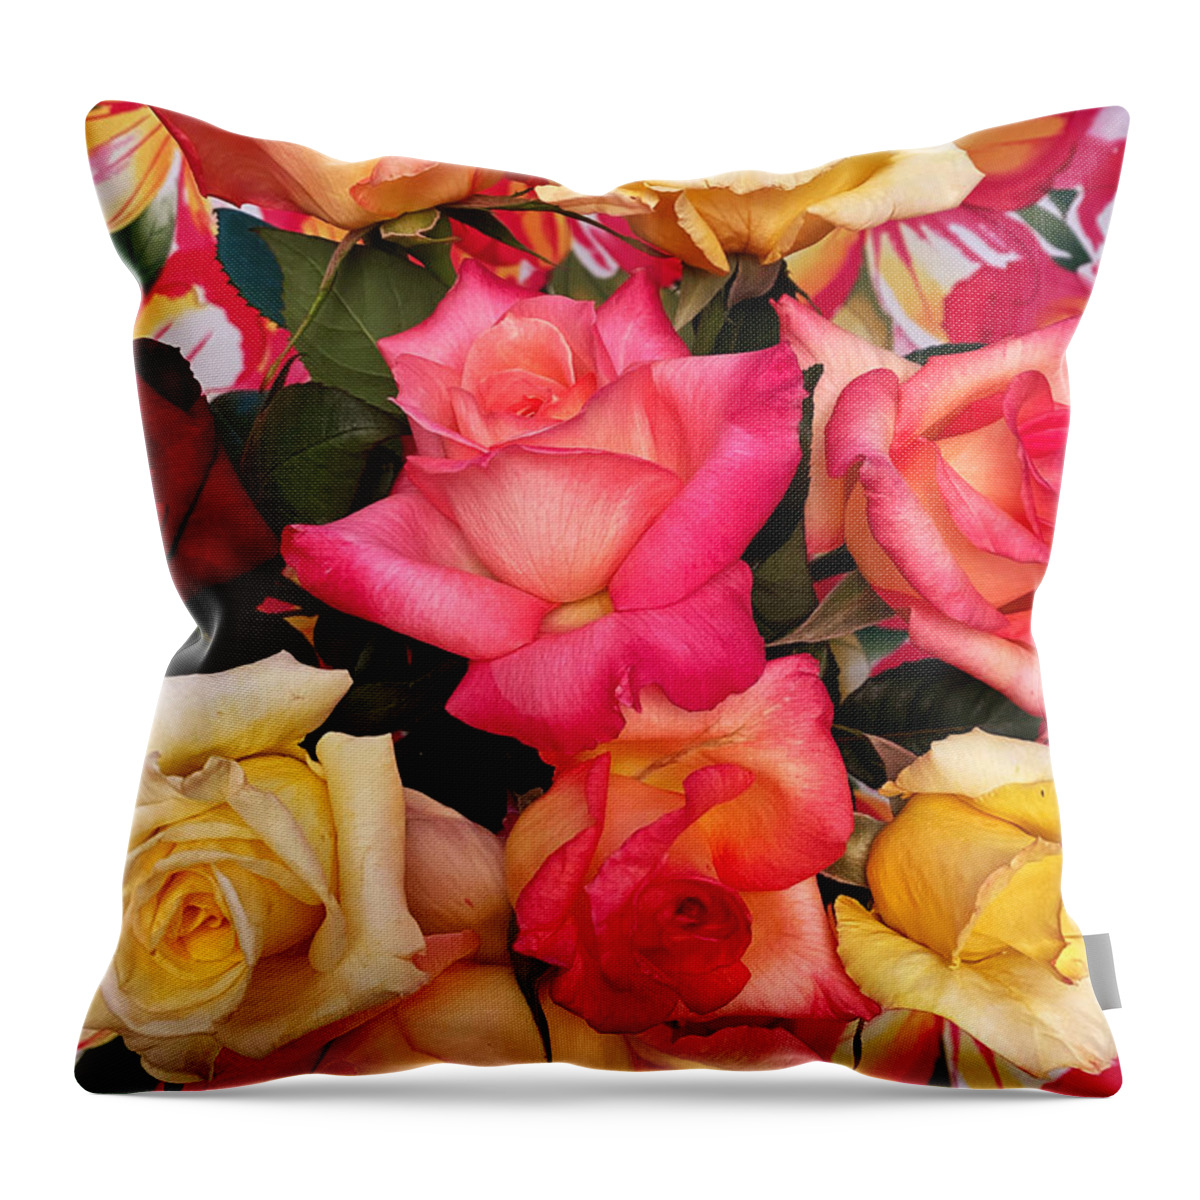 Flower Throw Pillow featuring the photograph Roses, Roses by Jeanette French